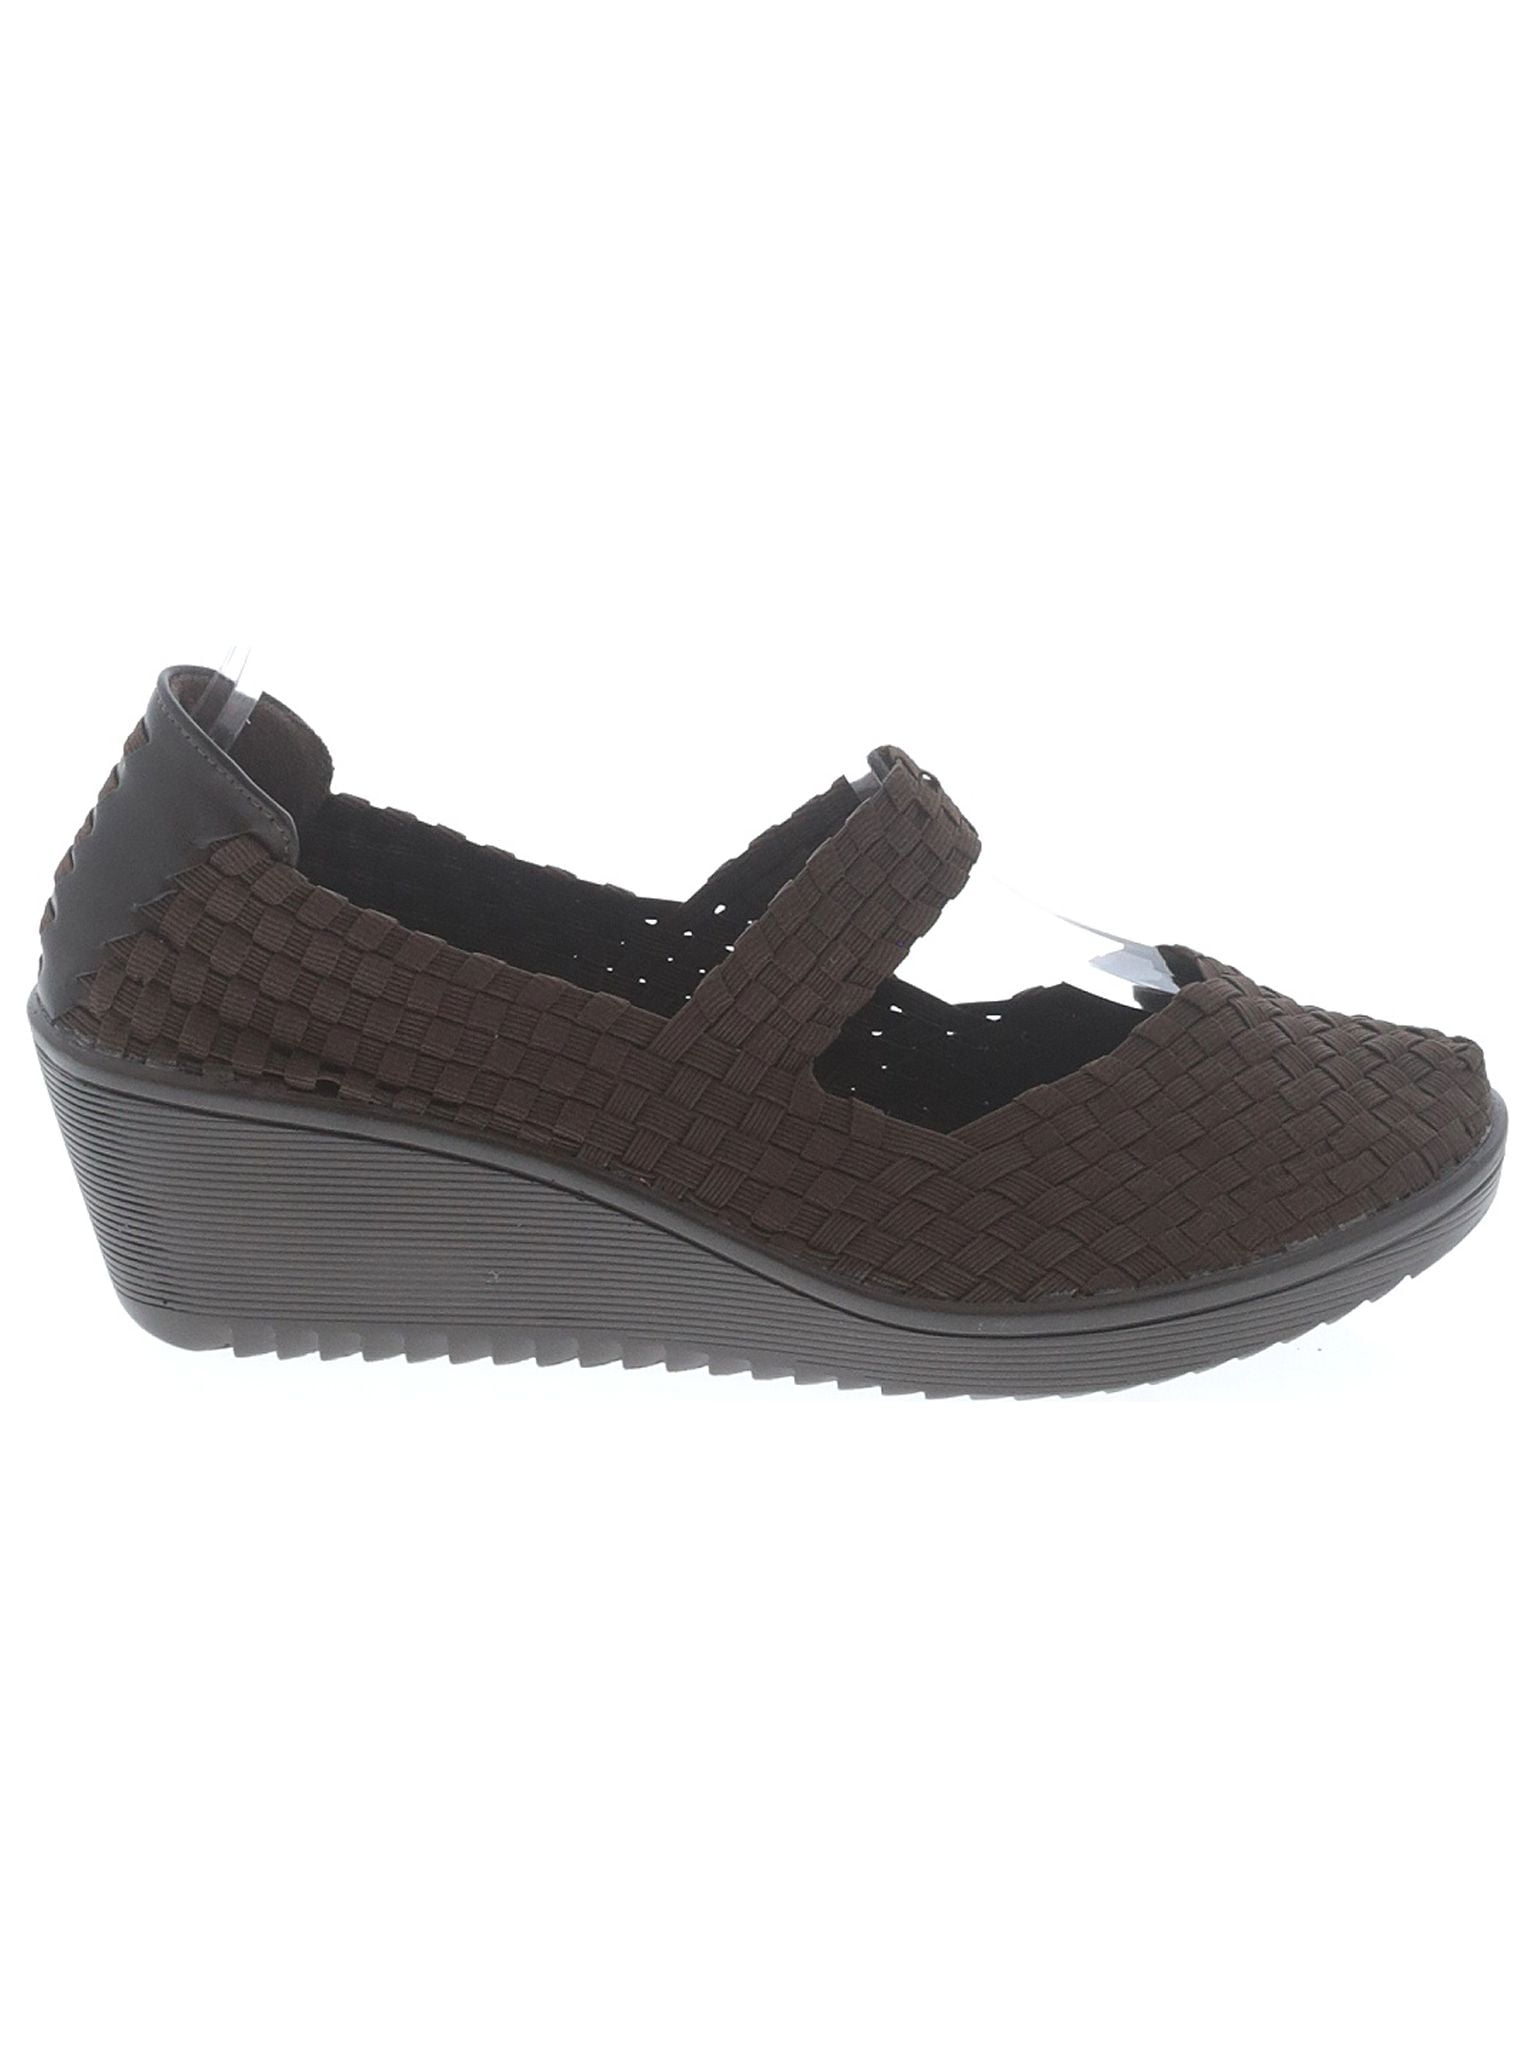 Pre-Owned Bare Traps Women's Size 10 Wedges - Walmart.com